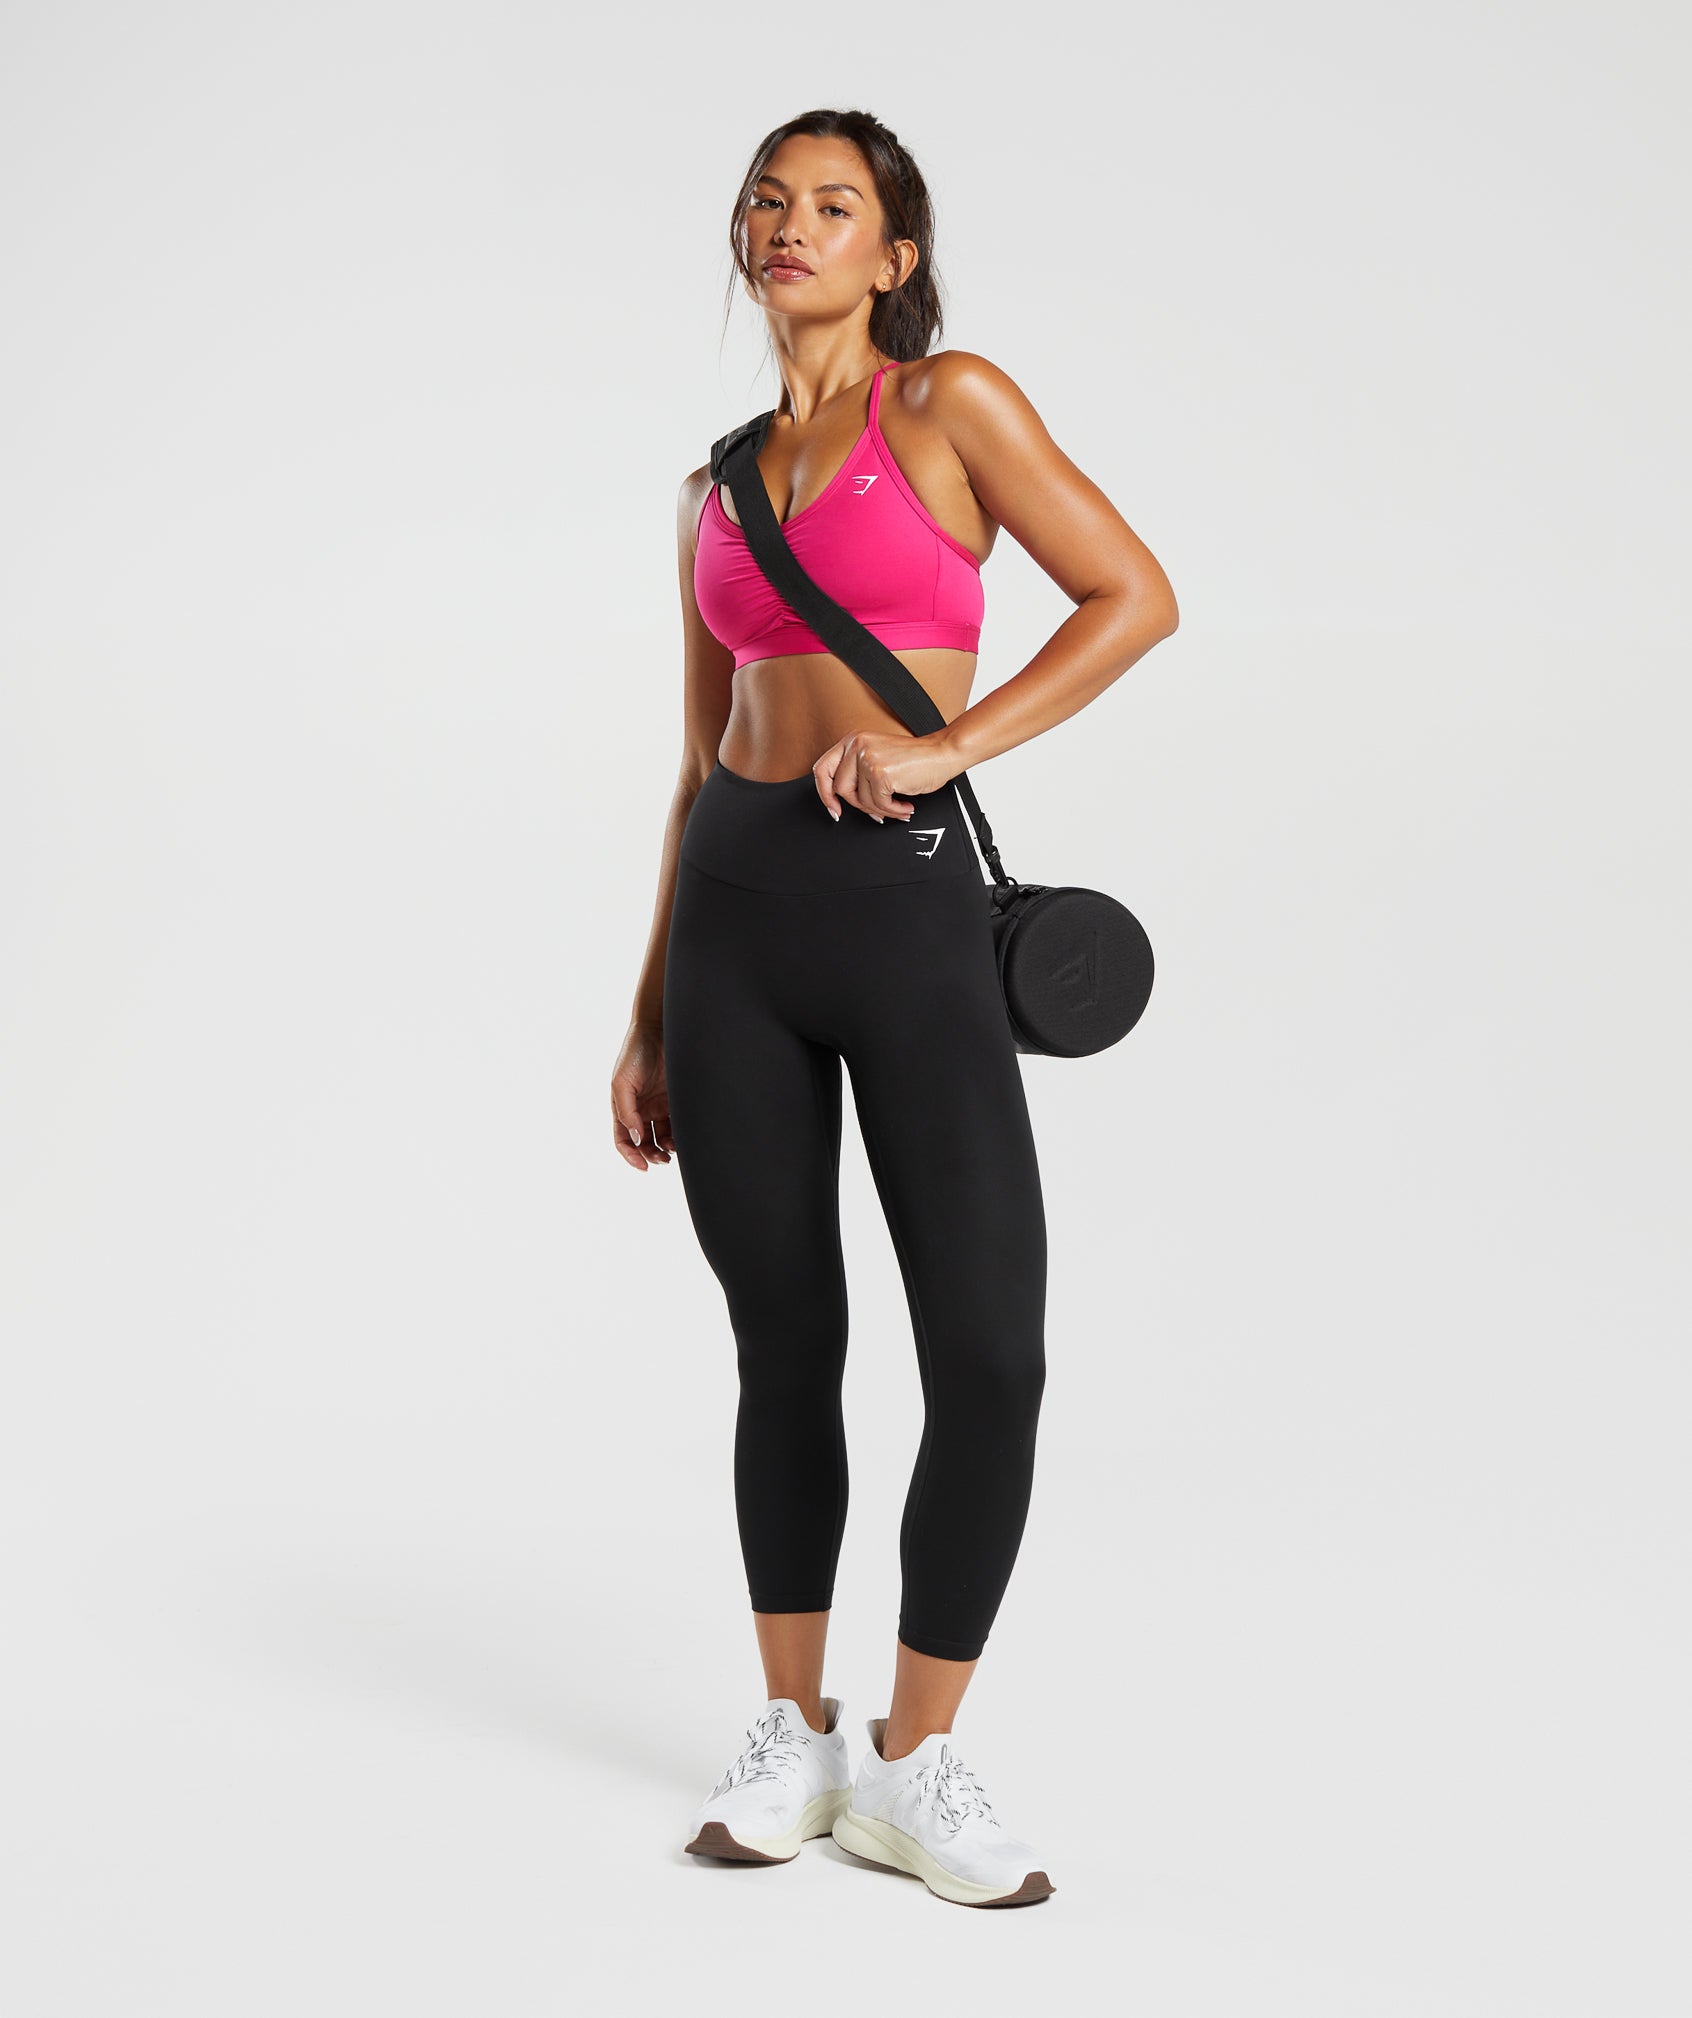 Ruched Sports Bra in Bold Magenta - view 4